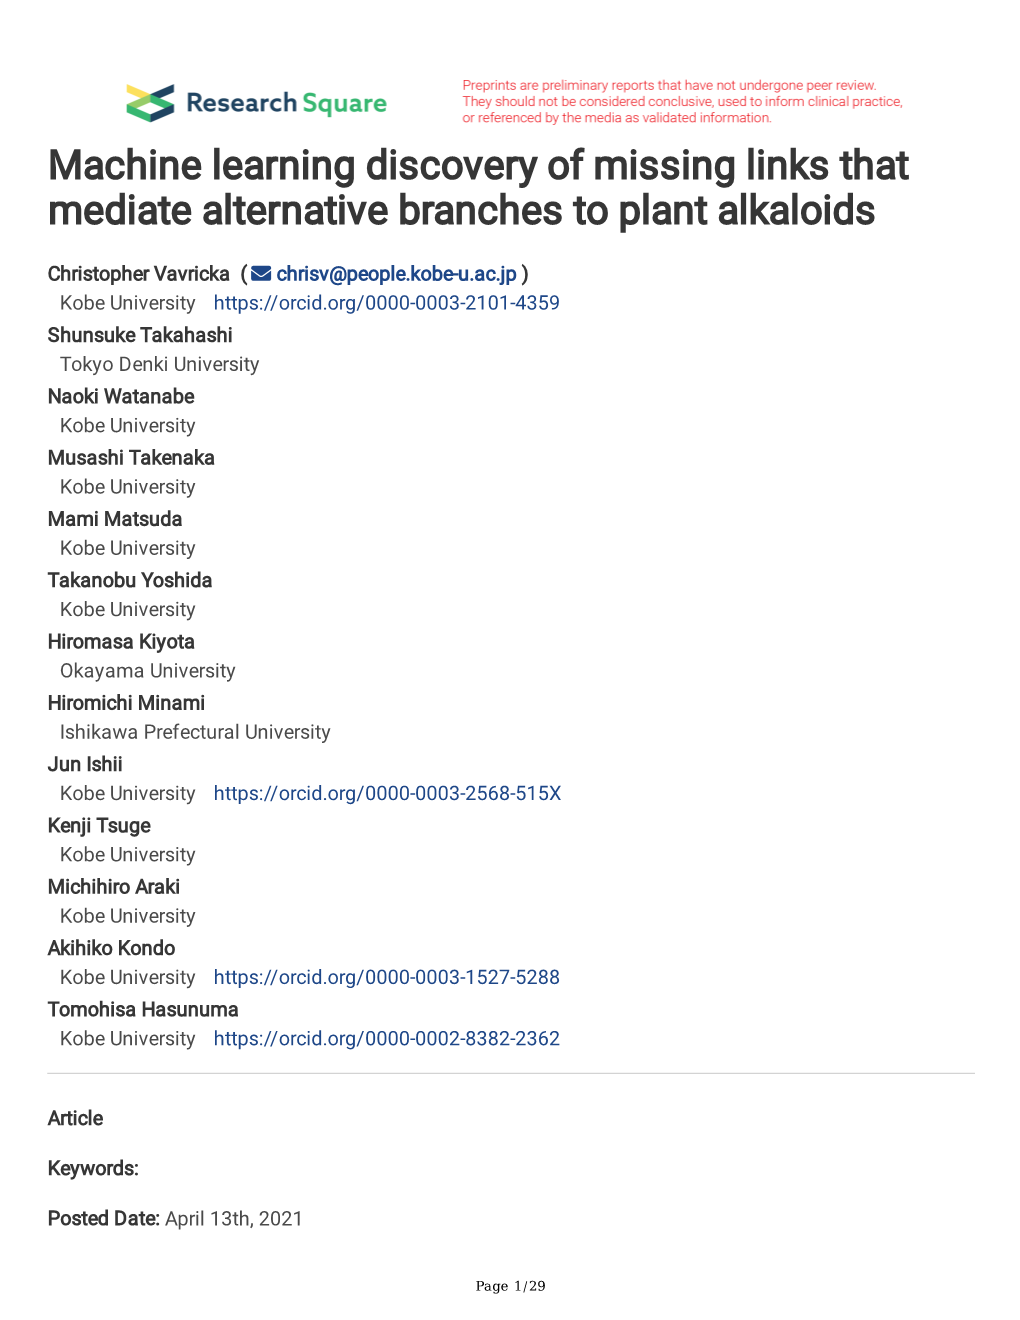 Machine Learning Discovery of Missing Links That Mediate Alternative Branches to Plant Alkaloids